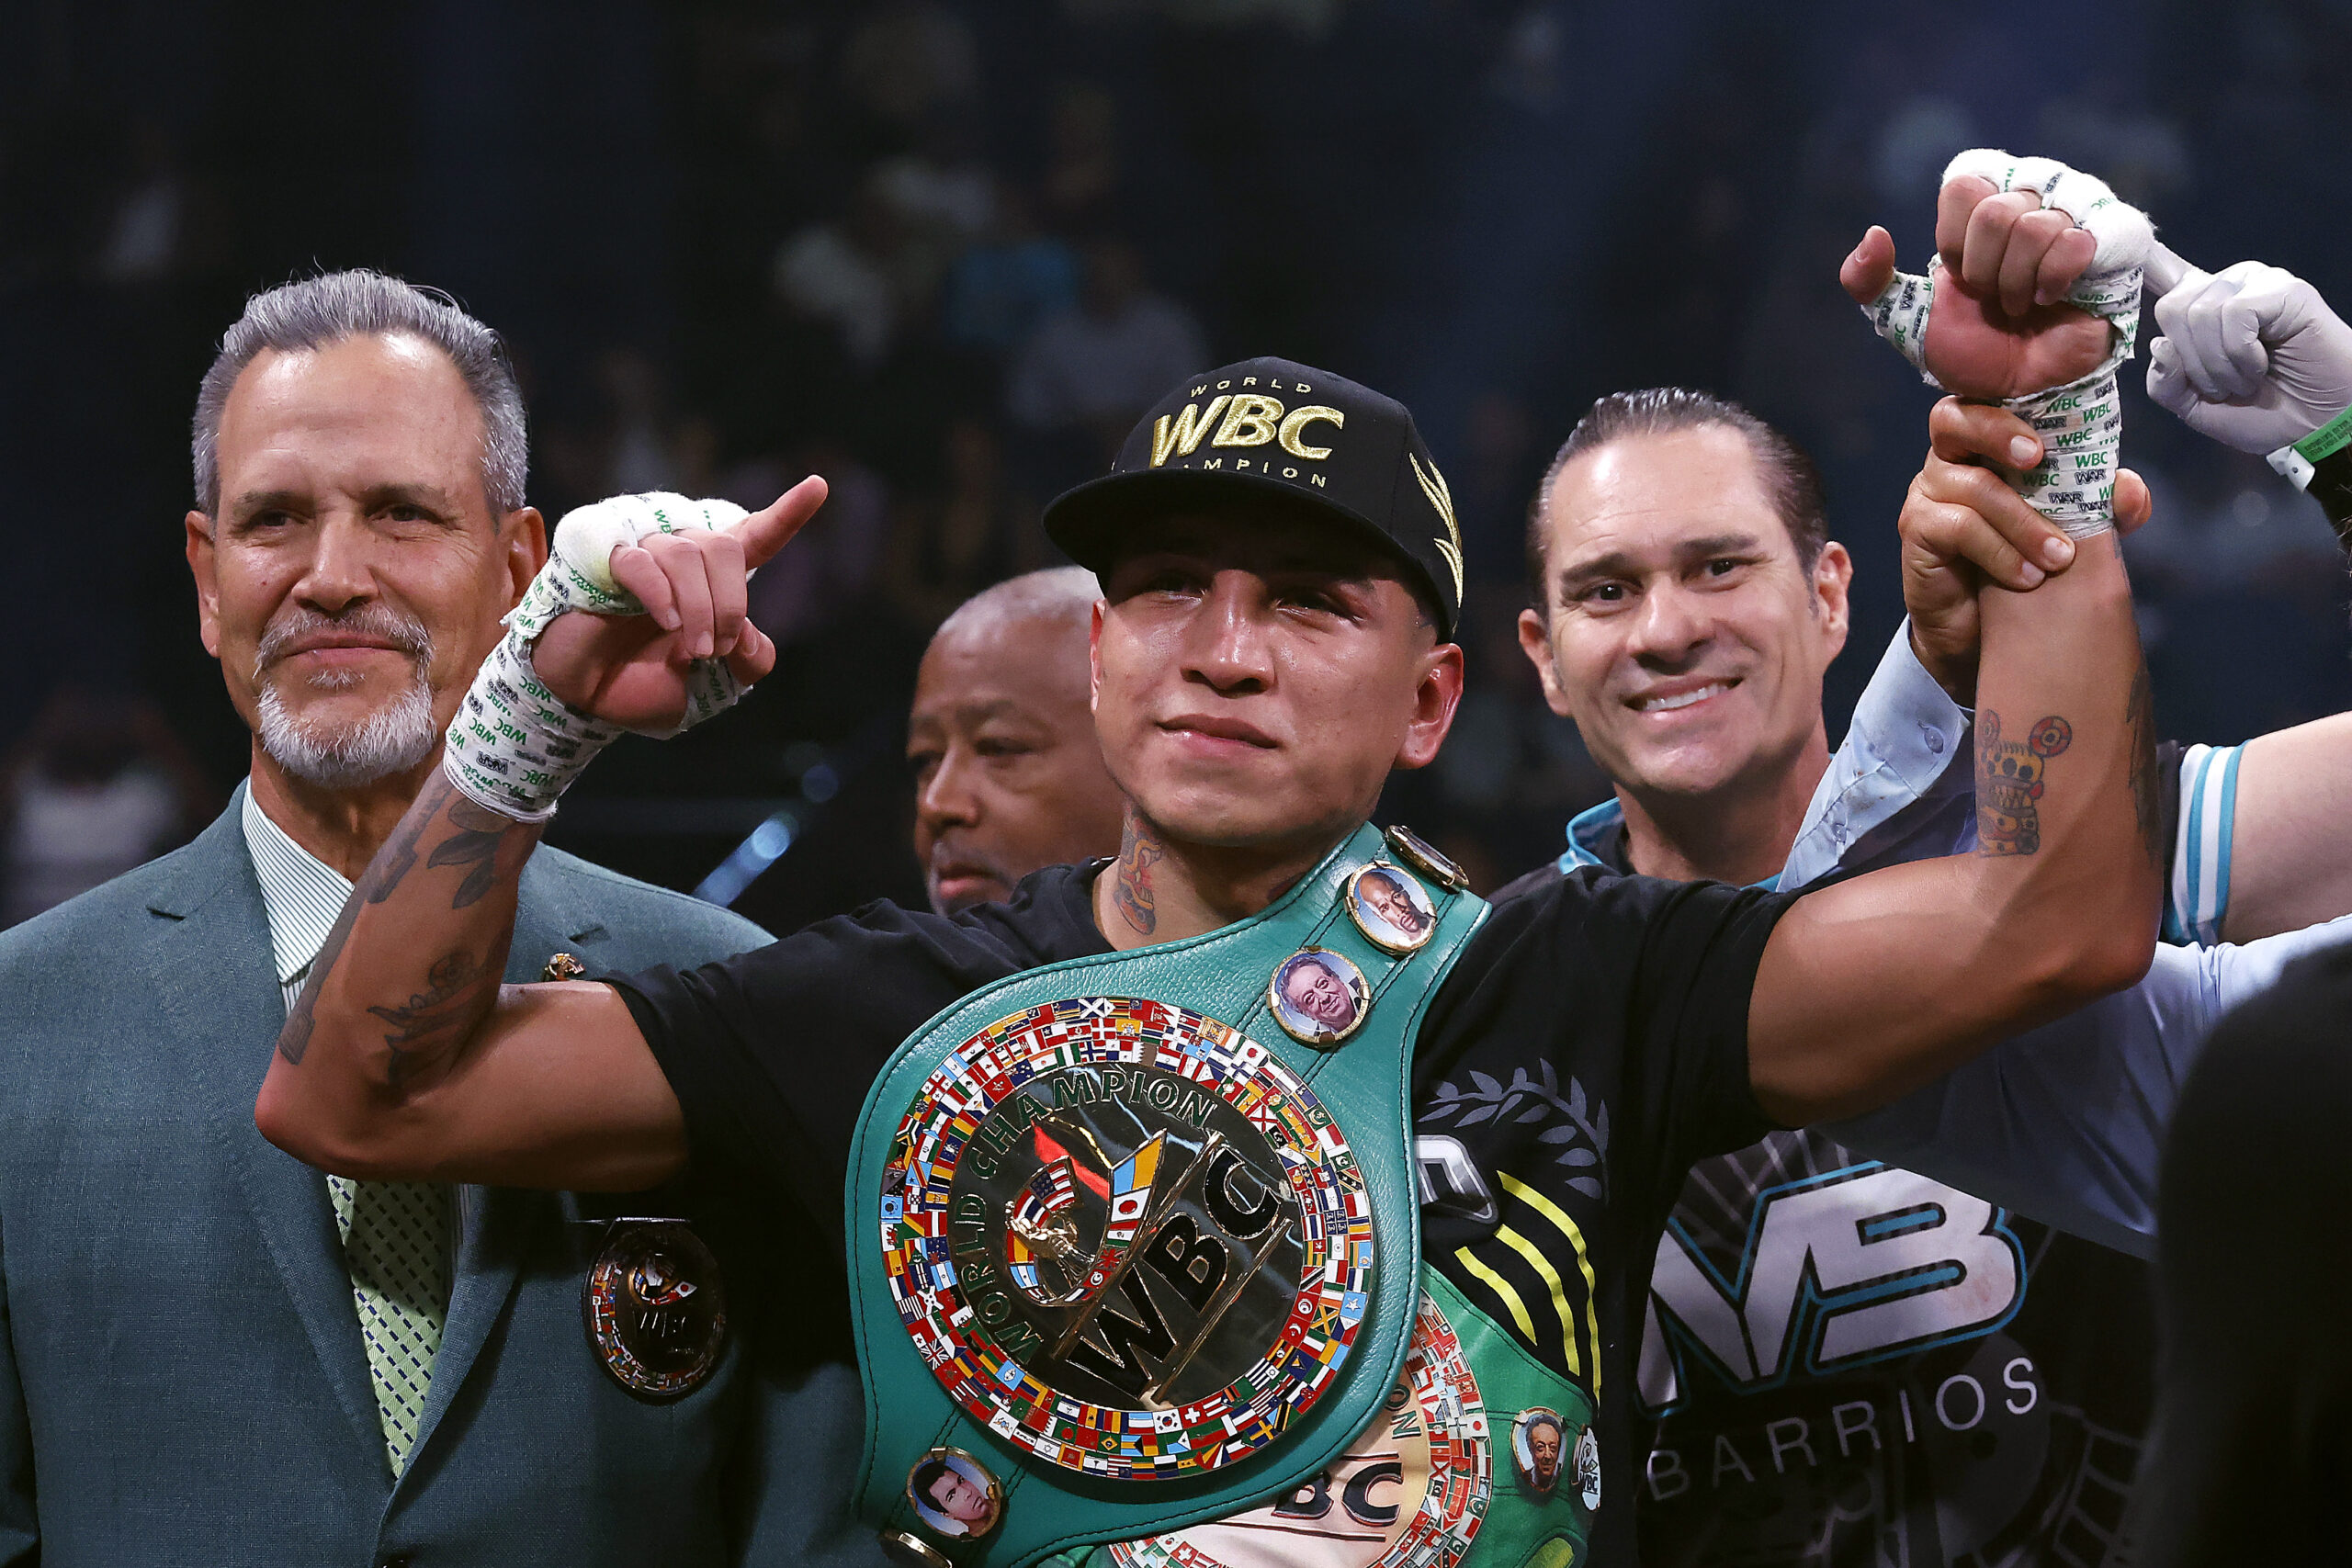 mario-barrios-defeated-yordenis-ugas-by-unanimous-decision-at-the-t-mobile-arena-in-las-vegas-[video]